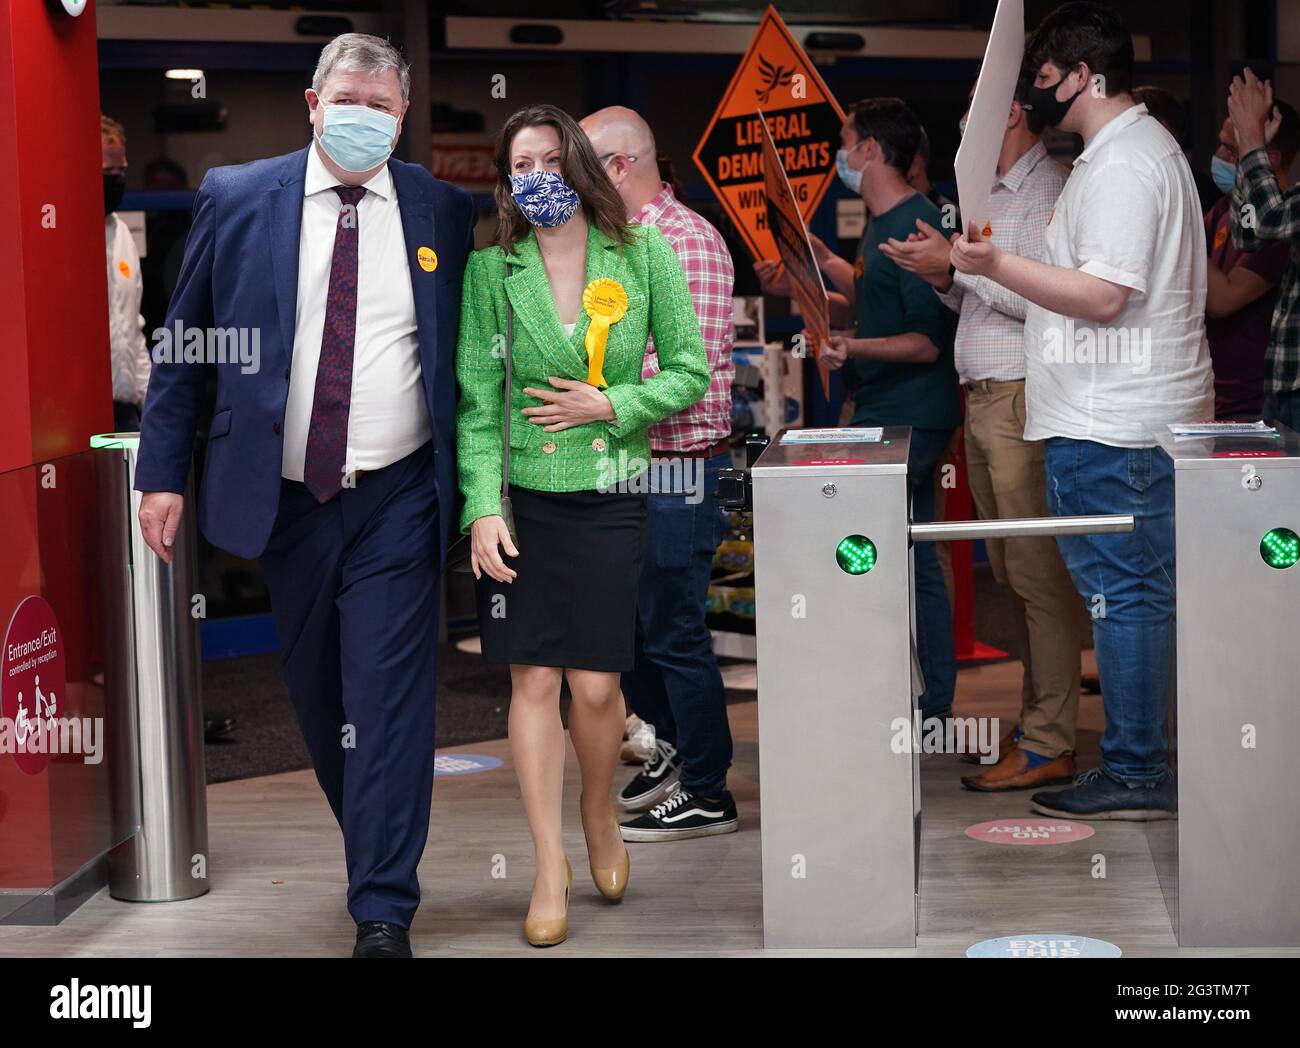 Liberal Democrat candidate Sarah Green and Alistair Carmichael, Liberal Democrat MP for Orkney and Shetland, are greeted by party supporters upon arriving for the declaration in the Chesham and Amersham by-election at Chesham Leisure Centre in Chesham, Buckinghamshire. Picture date: Friday June 18, 2021. Stock Photo